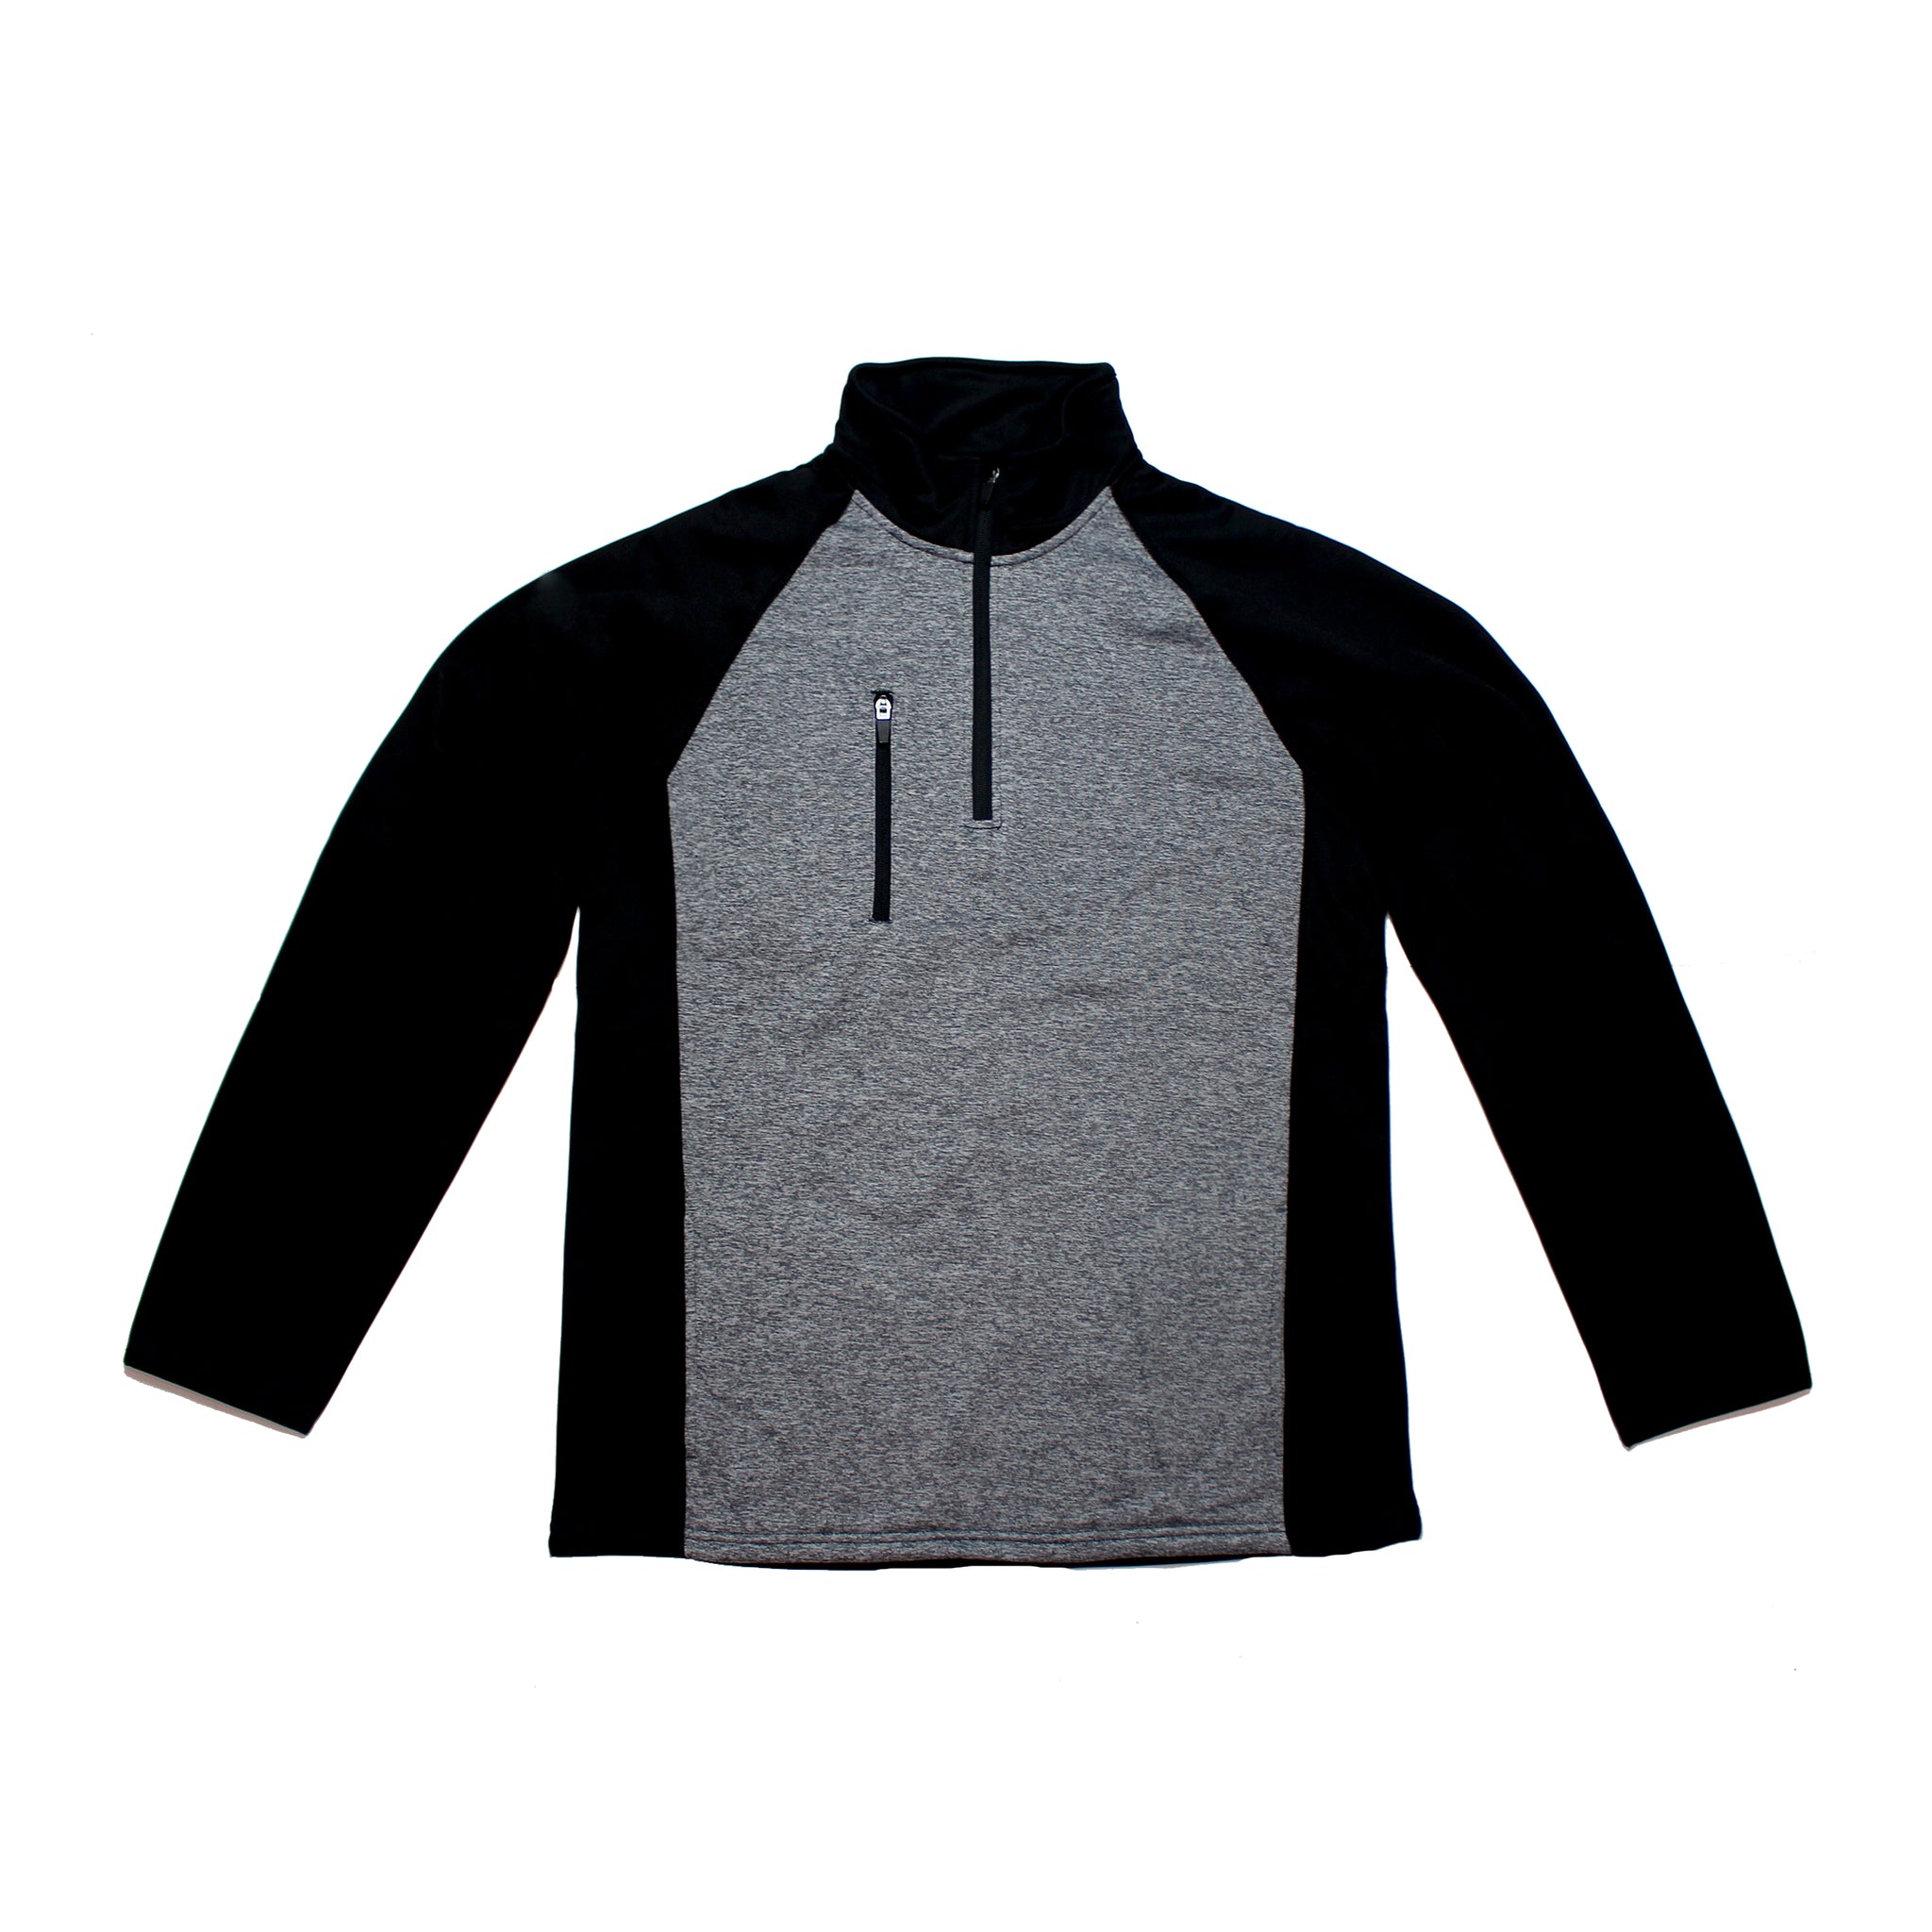 Men's Poly-Flex ¼ Zip Pullover with Heather front panel – The